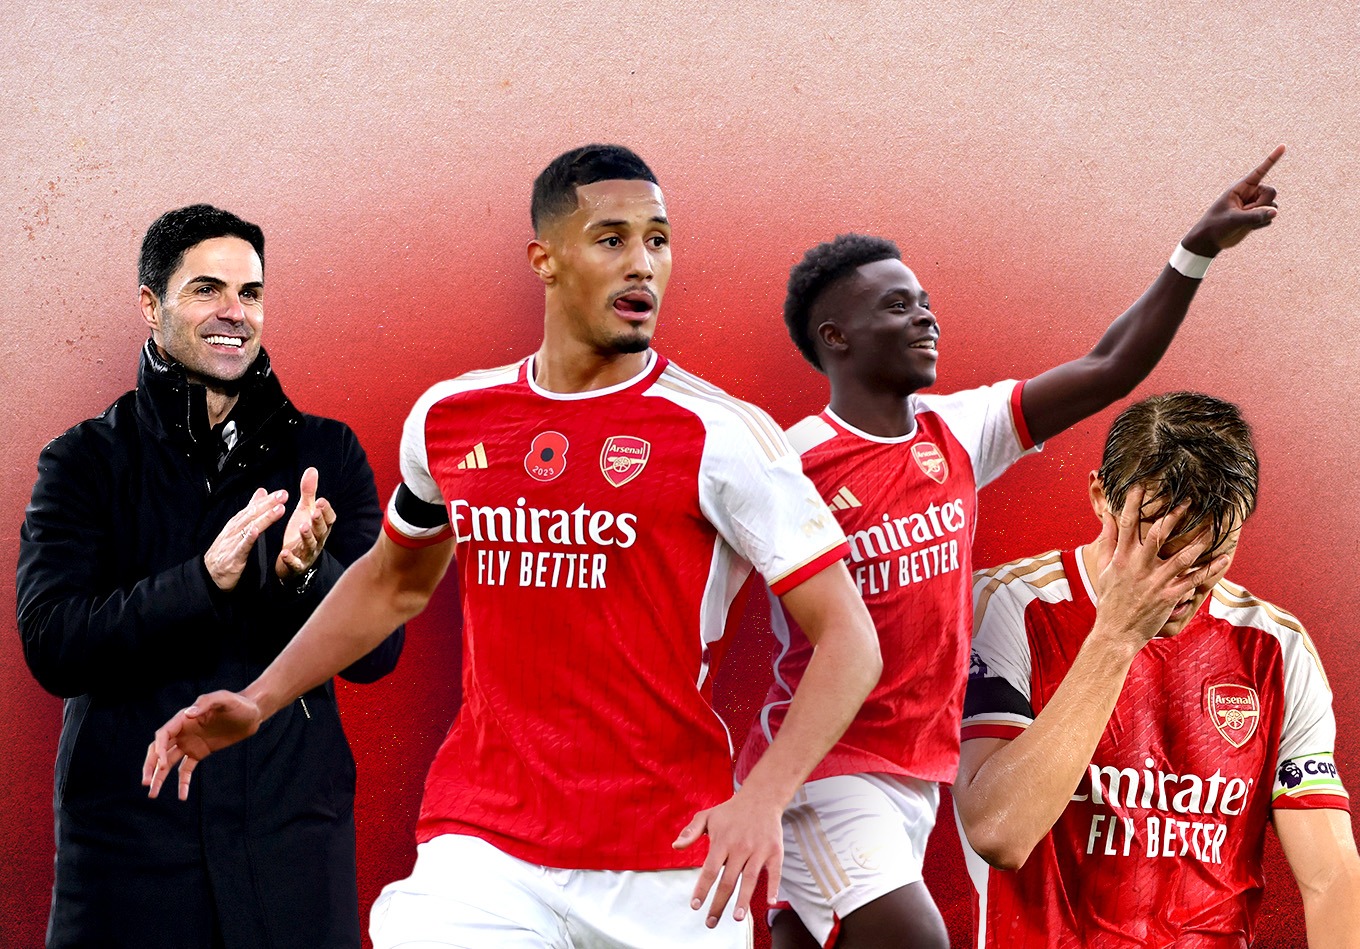 Arsenal Haven’t Clicked but They Are More Likely to Win the Title – Here’s Why